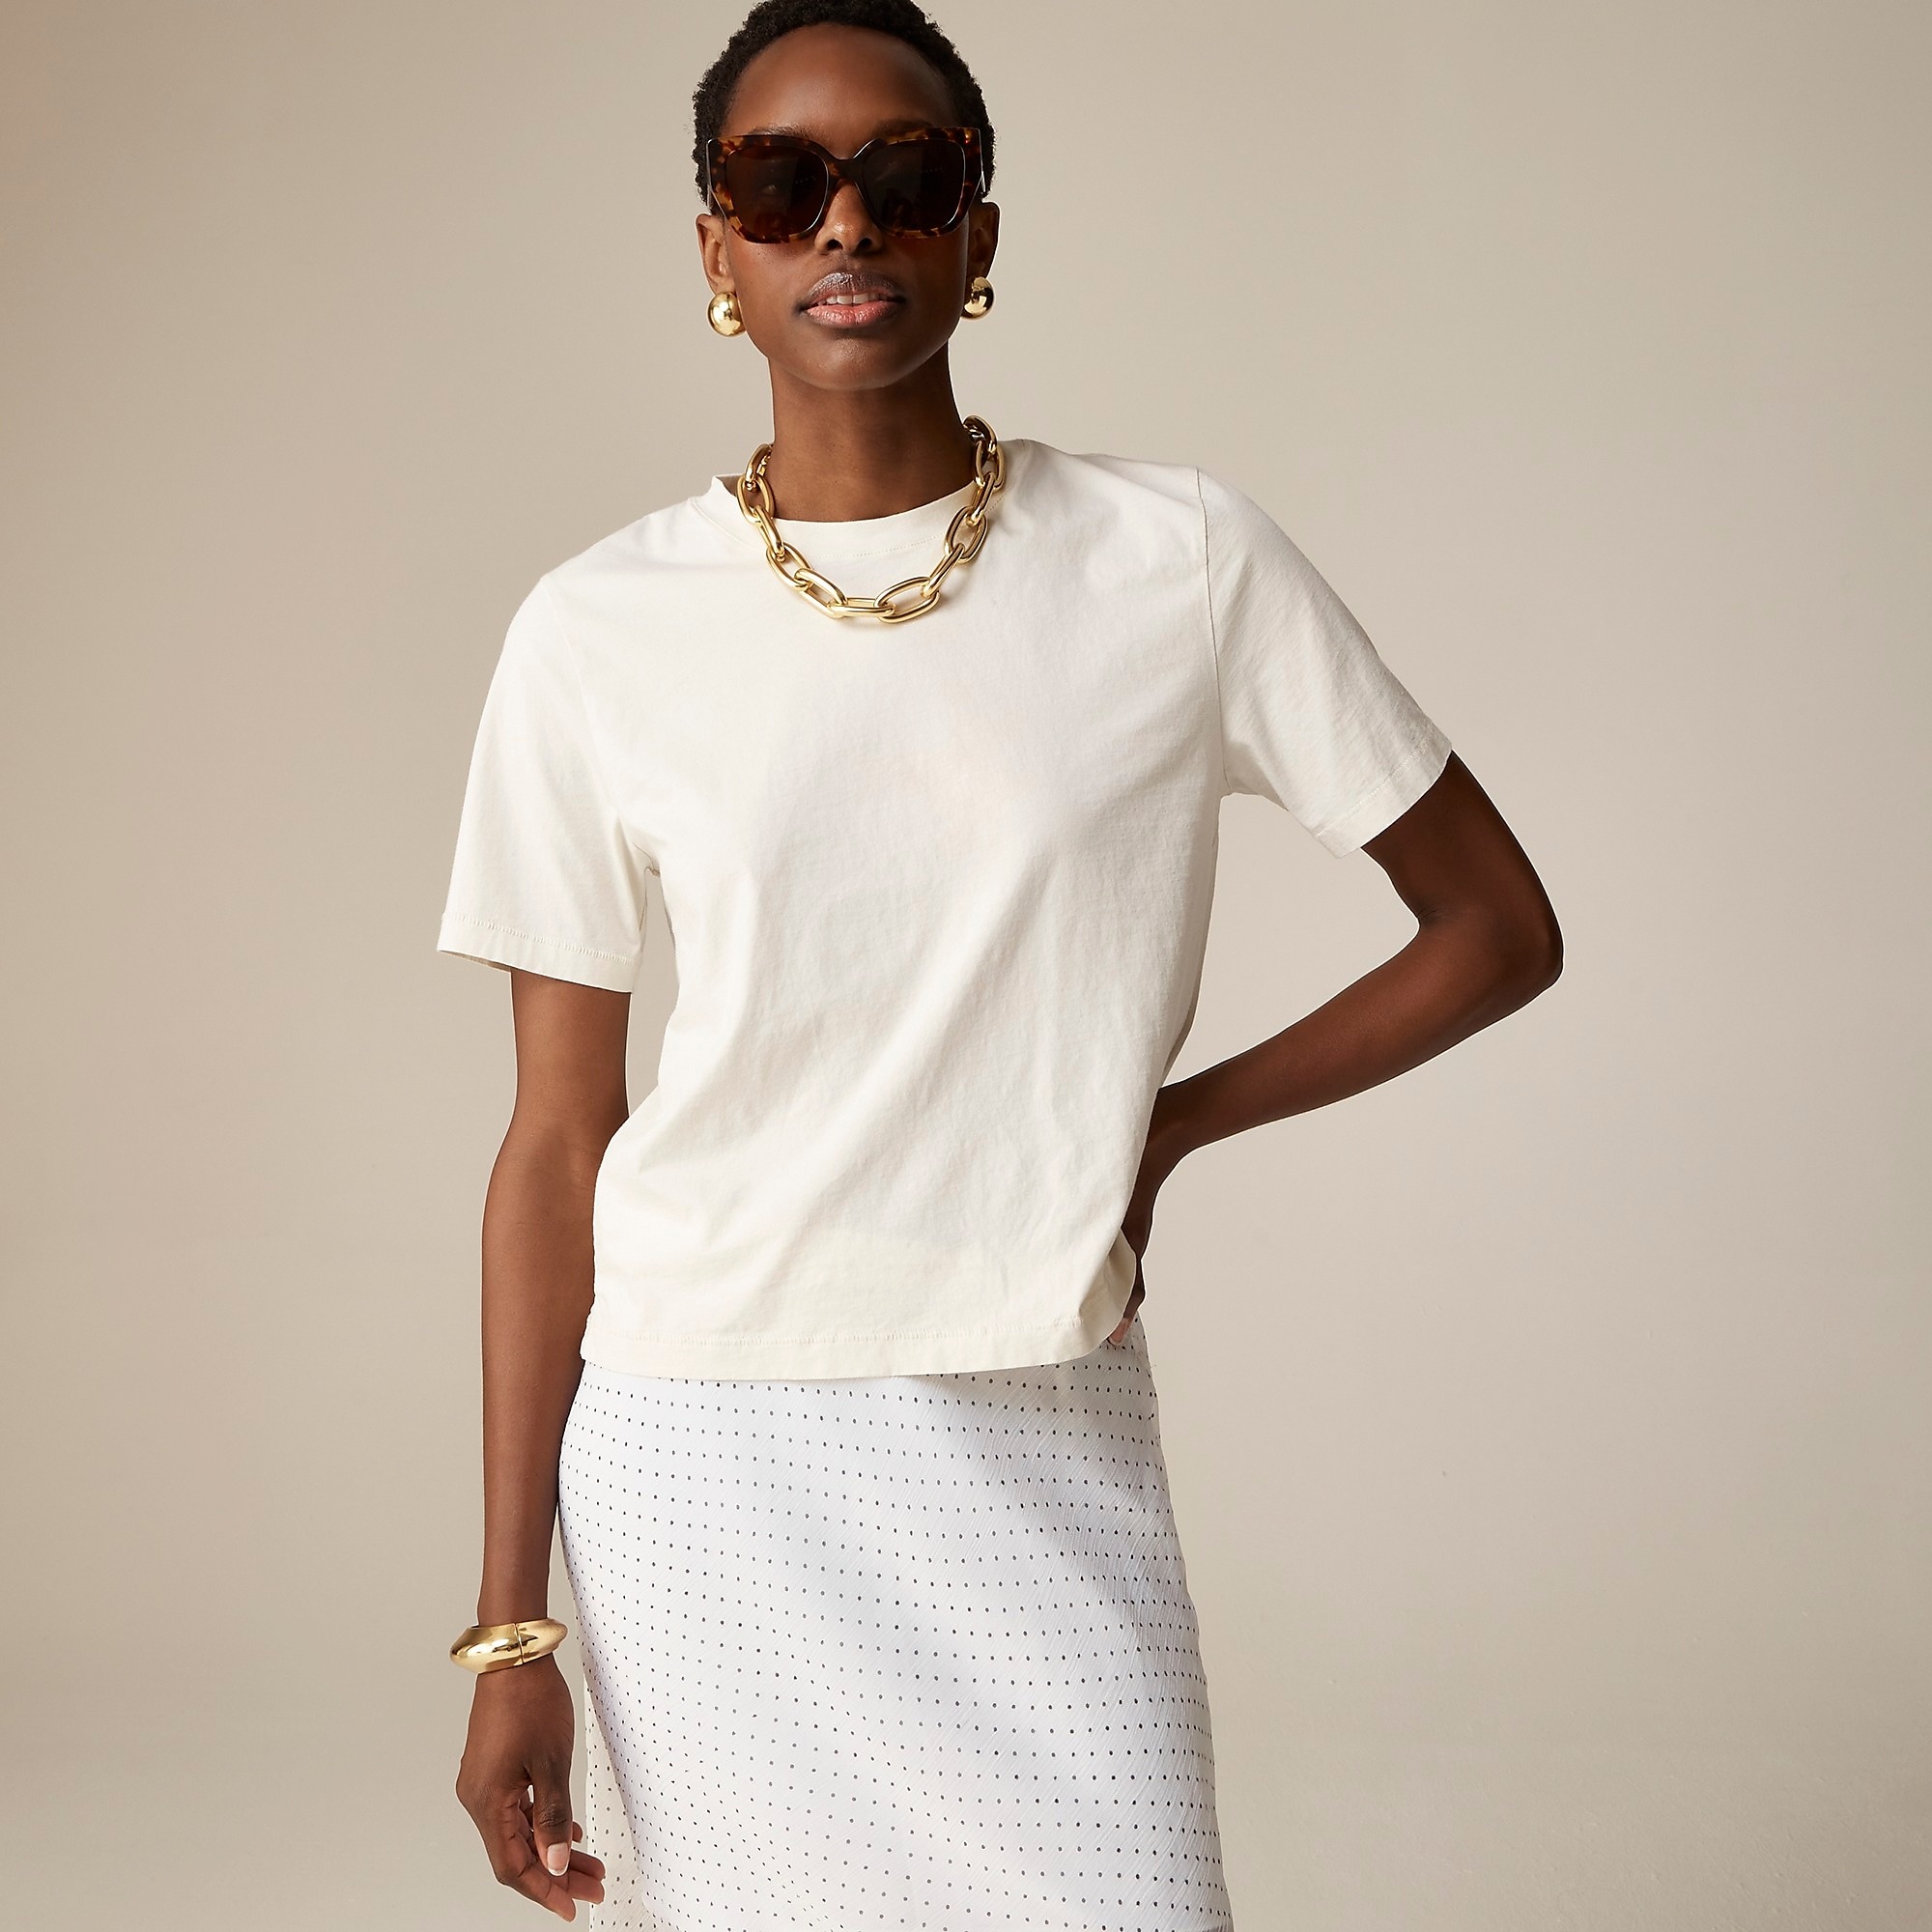 J.Crew, Pima Cotton Relaxed T-Shirt